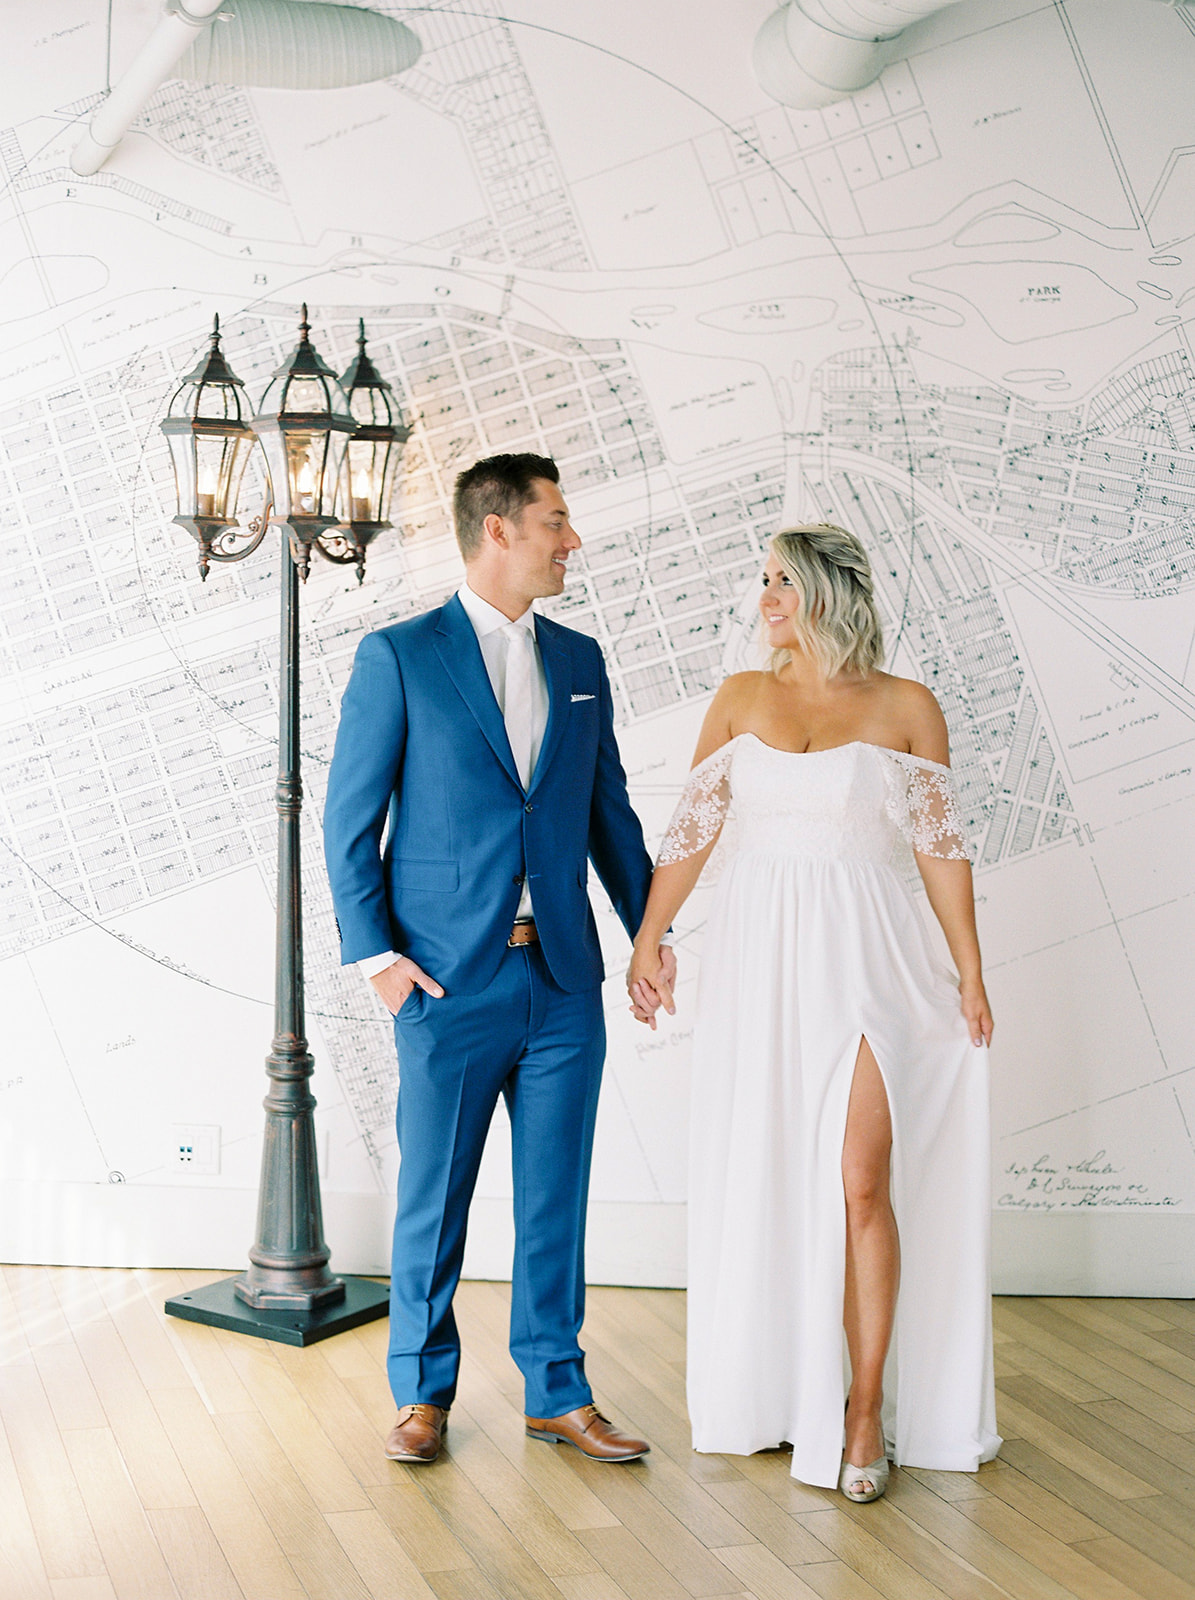 Craving a Paris Getaway? This Parisian Wedding Inspiration Will Transport You To a Quaint Town In France Featured by Brontë Bride, blue wedding palette, groom attire